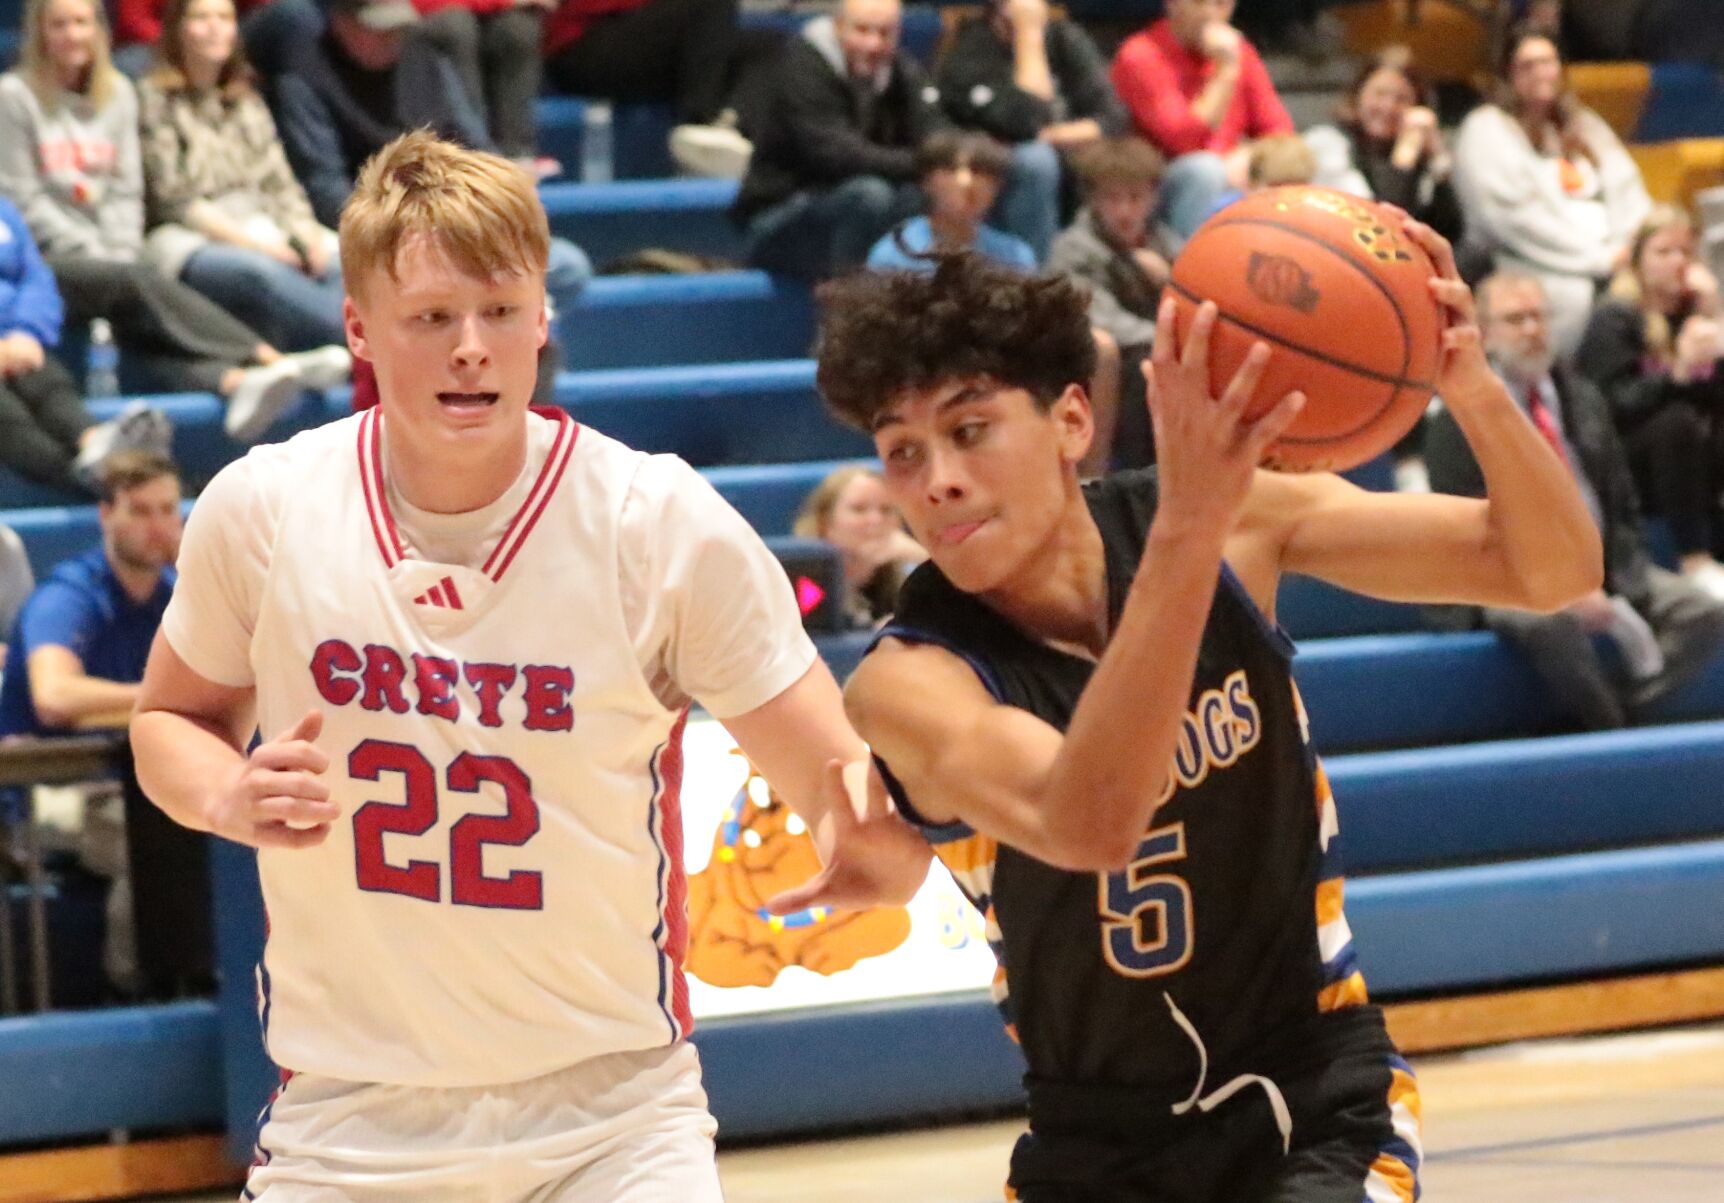 Crete Cardinals dominate Gering in recent basketball matchup